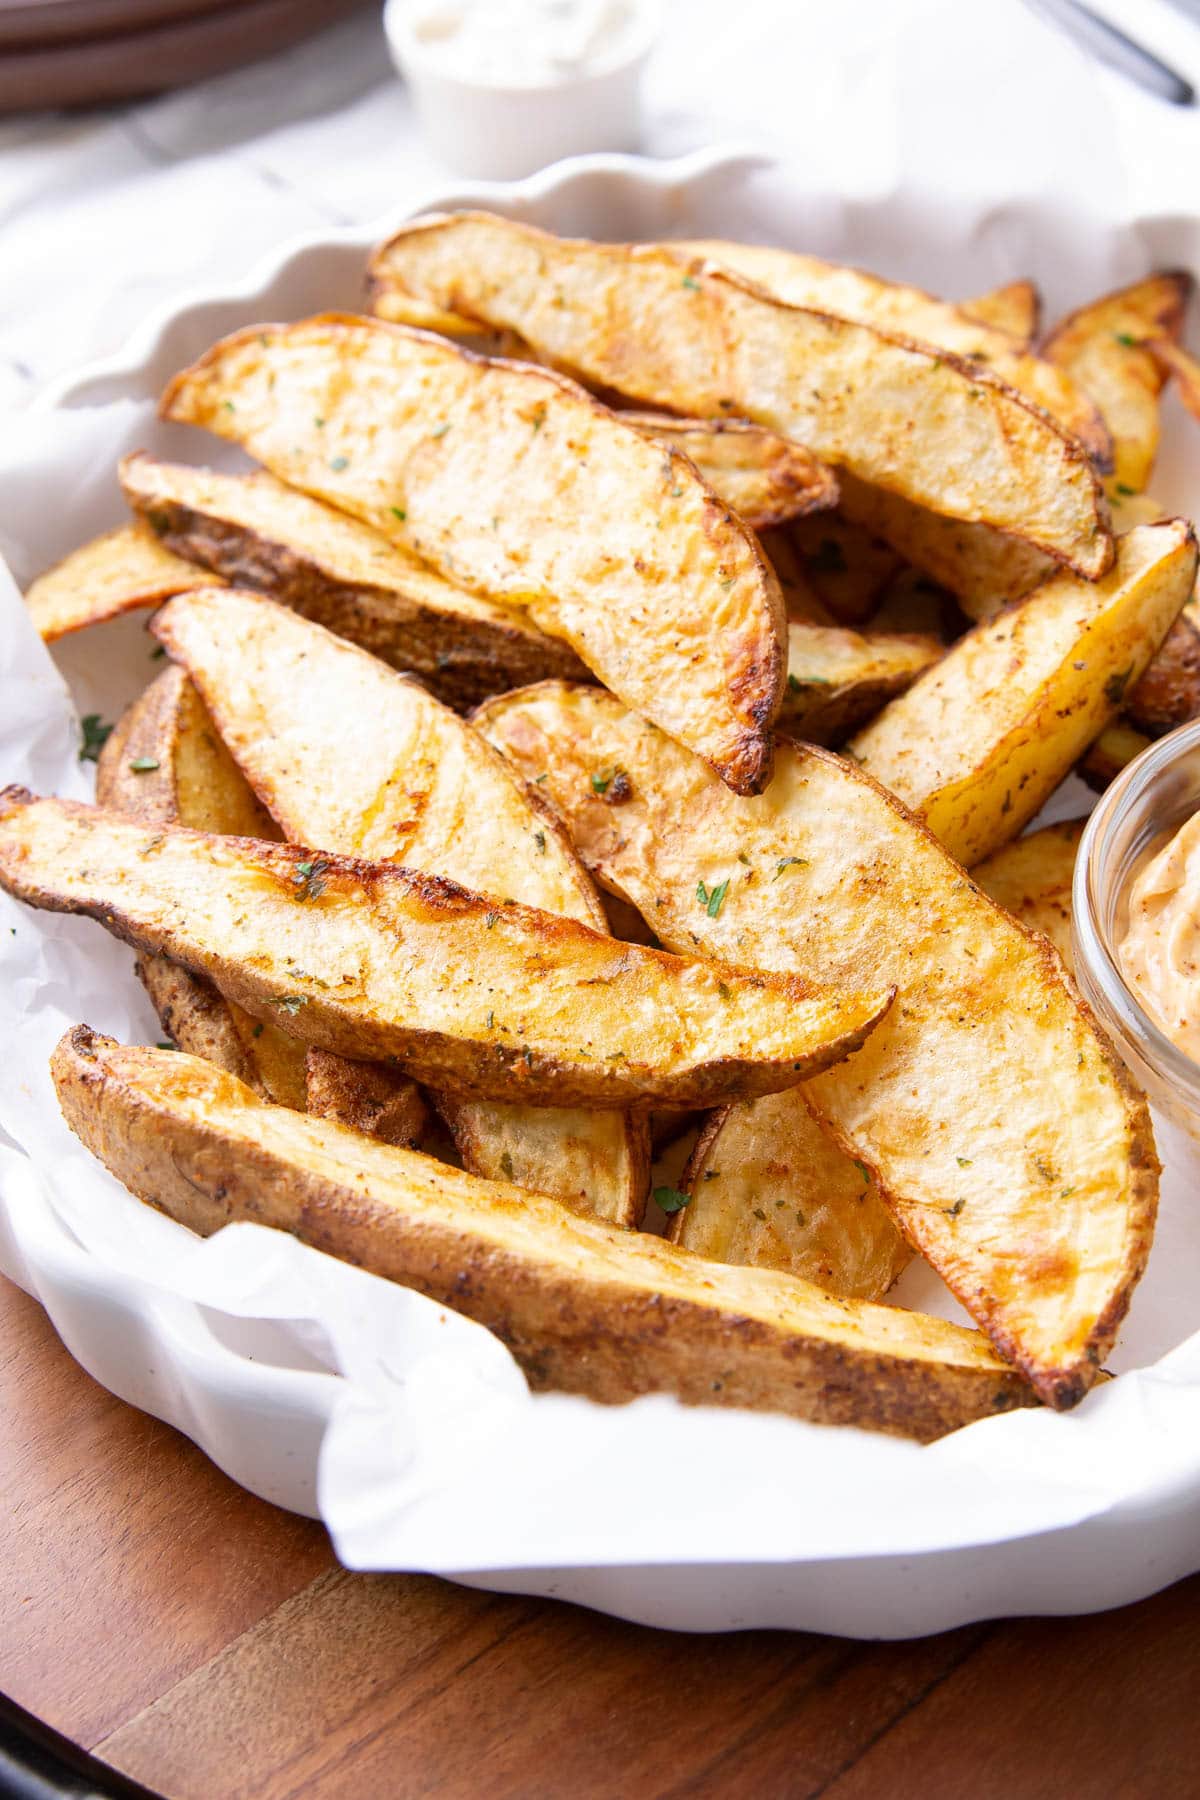 A platter of potato wedges made in the air fryer served with condiments and topped with seasonings.